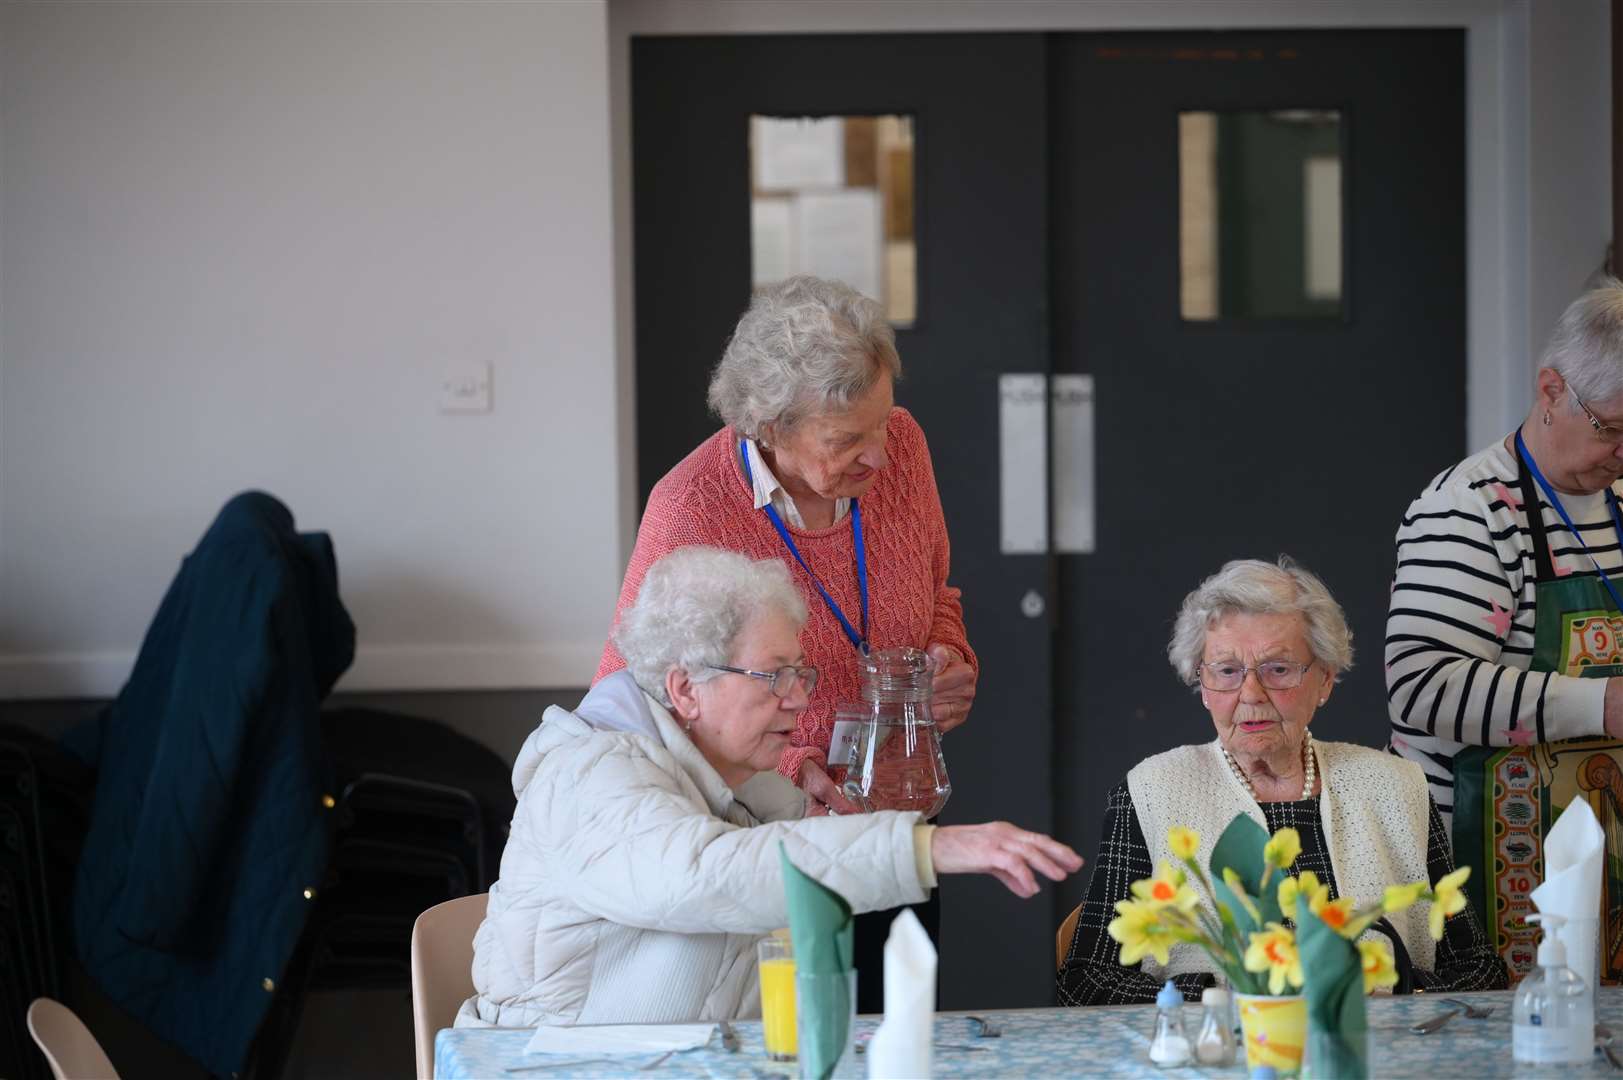 Forget-me-knot lunch club at Gaywood Church Rooms celebrating 56th birthday. (63273660)